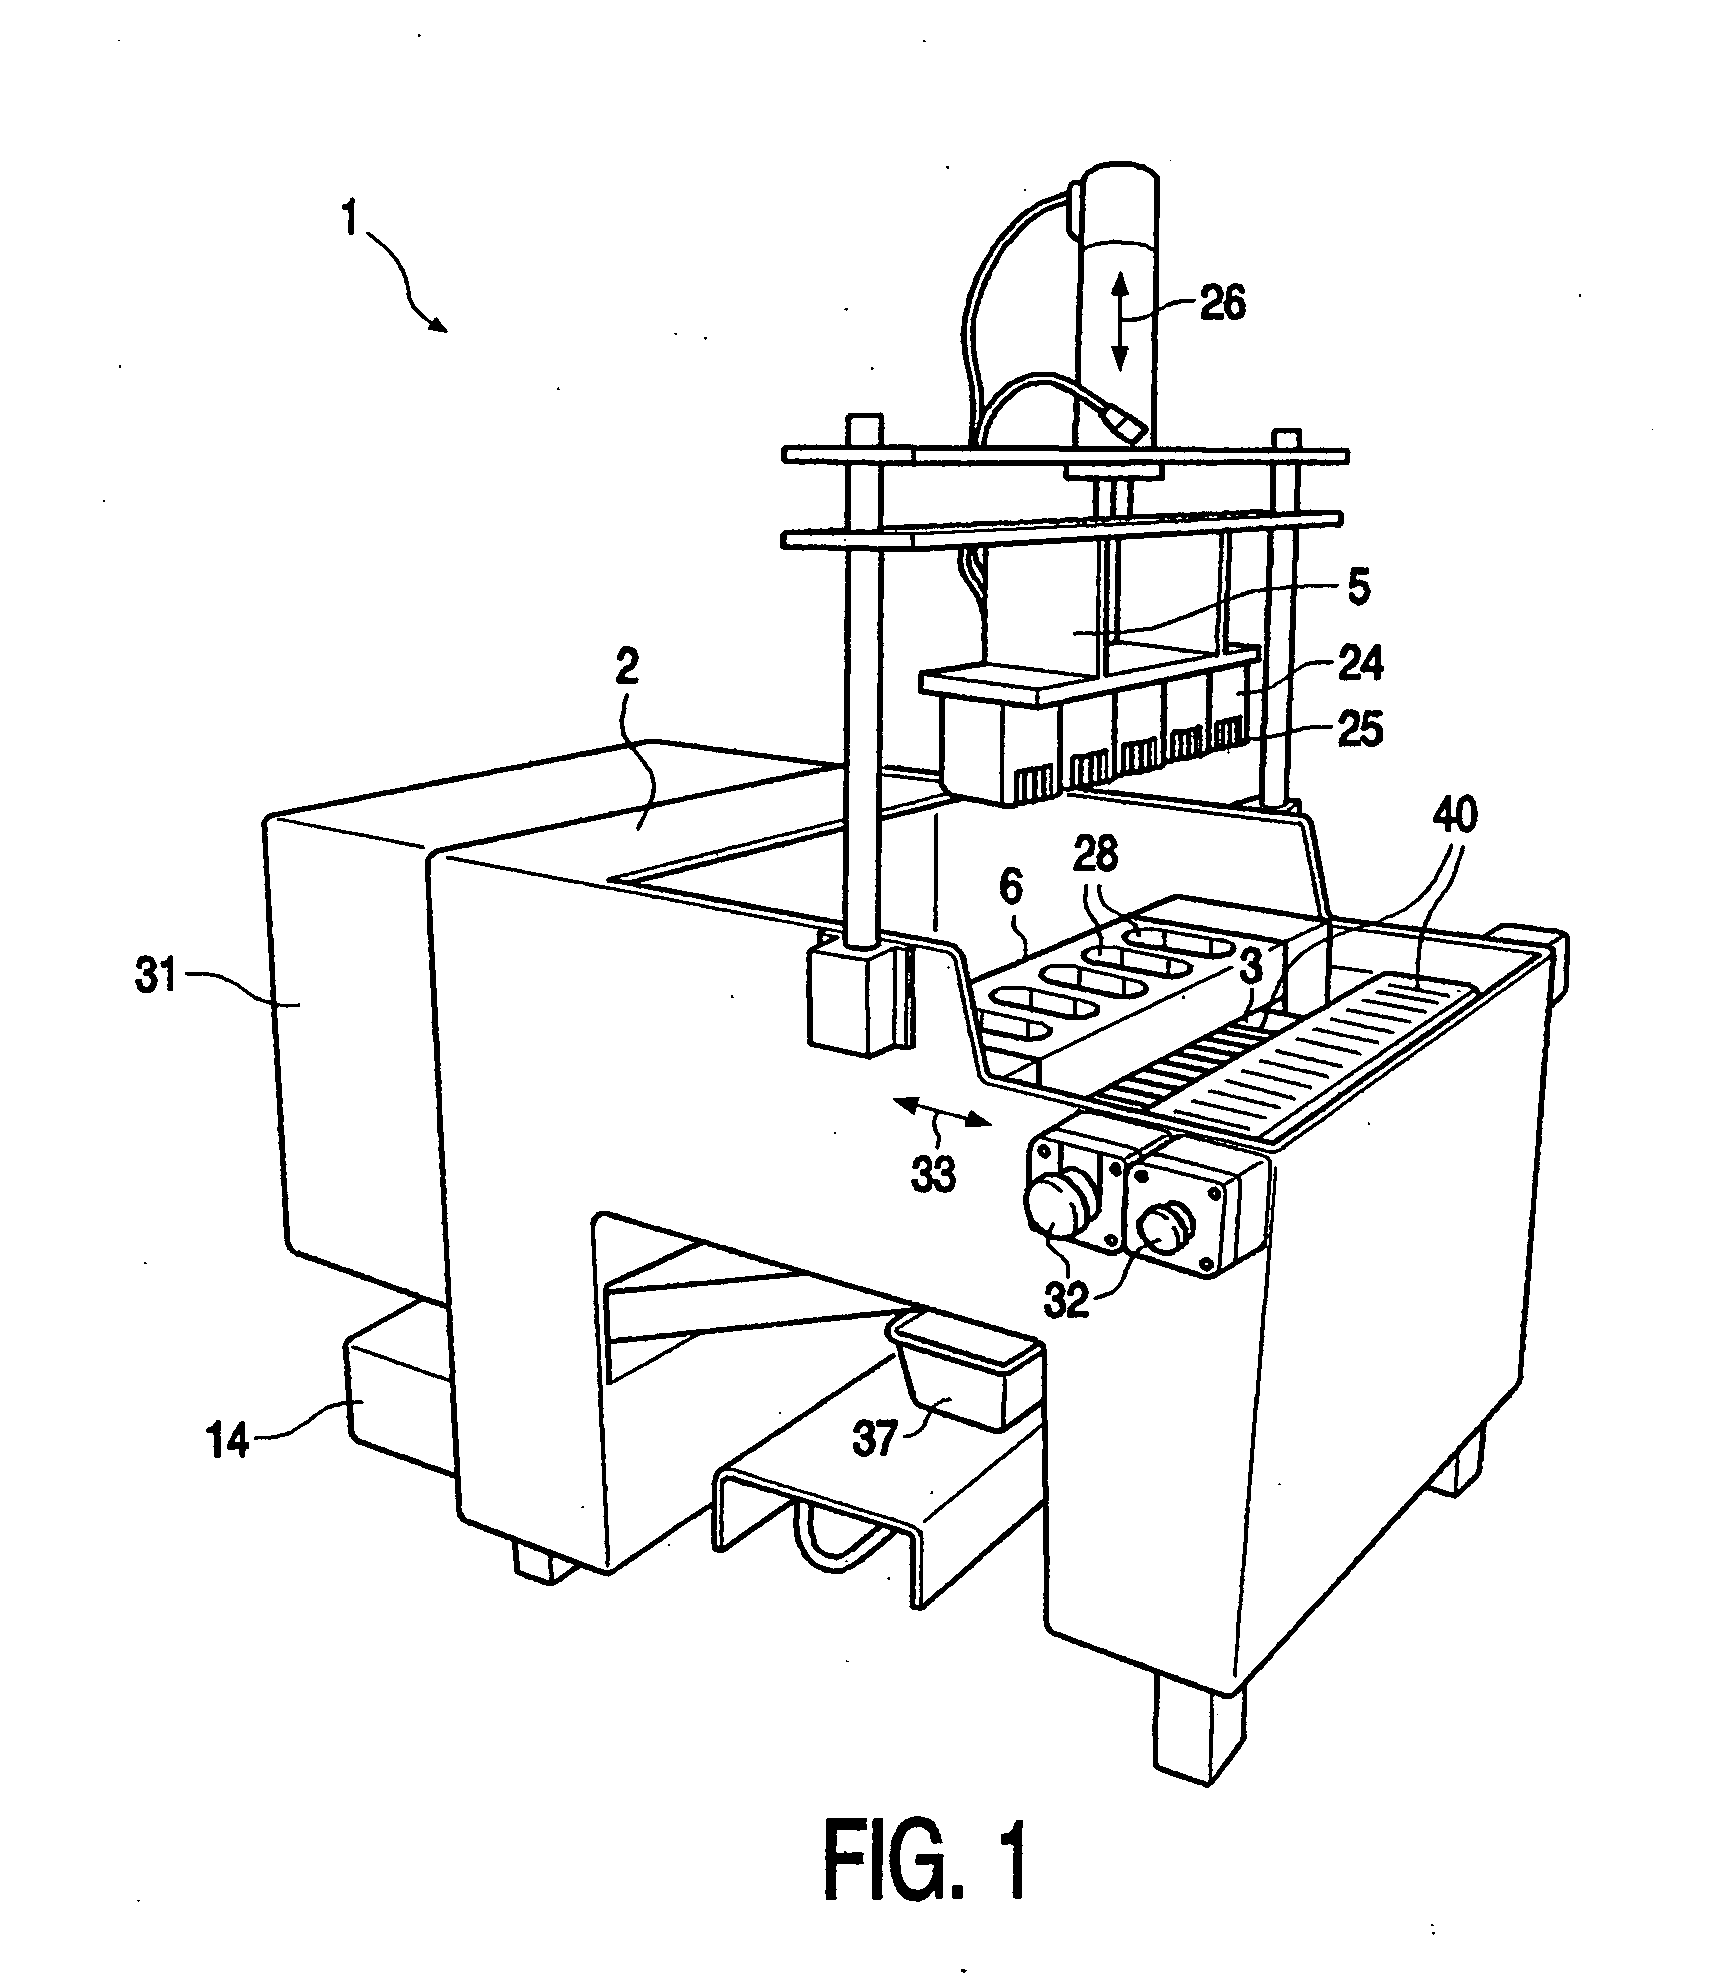 Method and apparatus for slicing a number of articles into a plurality of uniform thin slices in a single operation